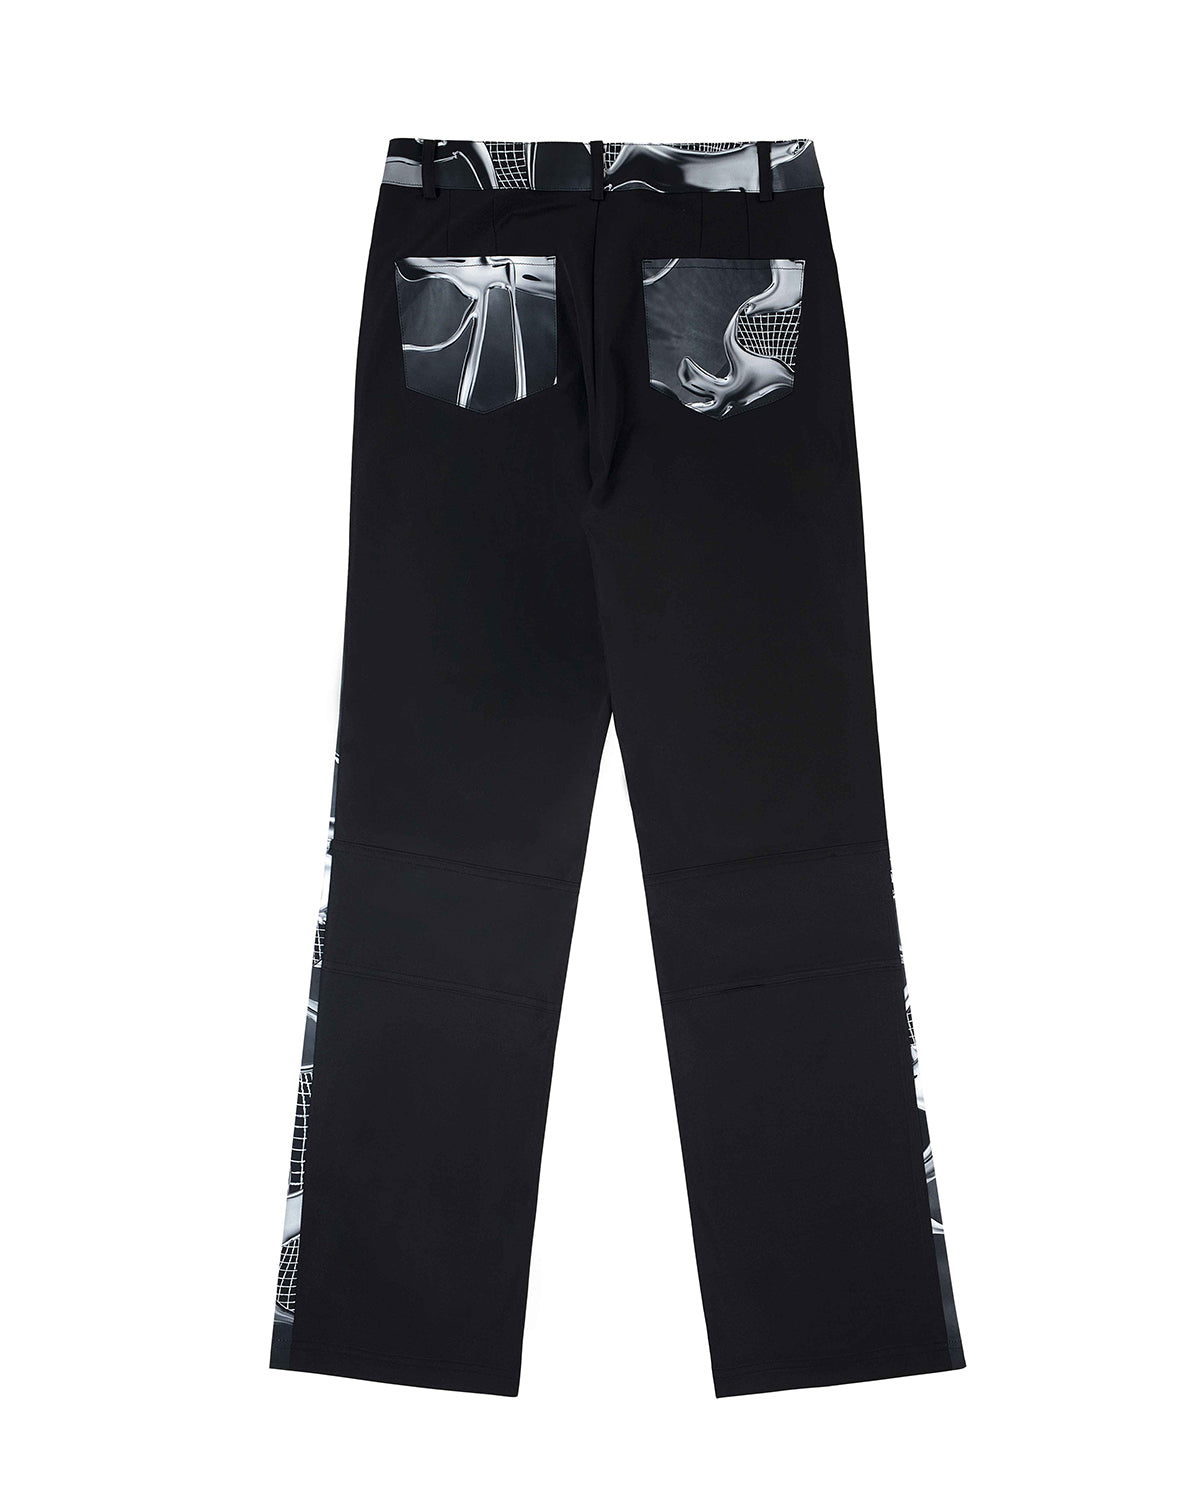 Grid Graphic Trousers _ Black